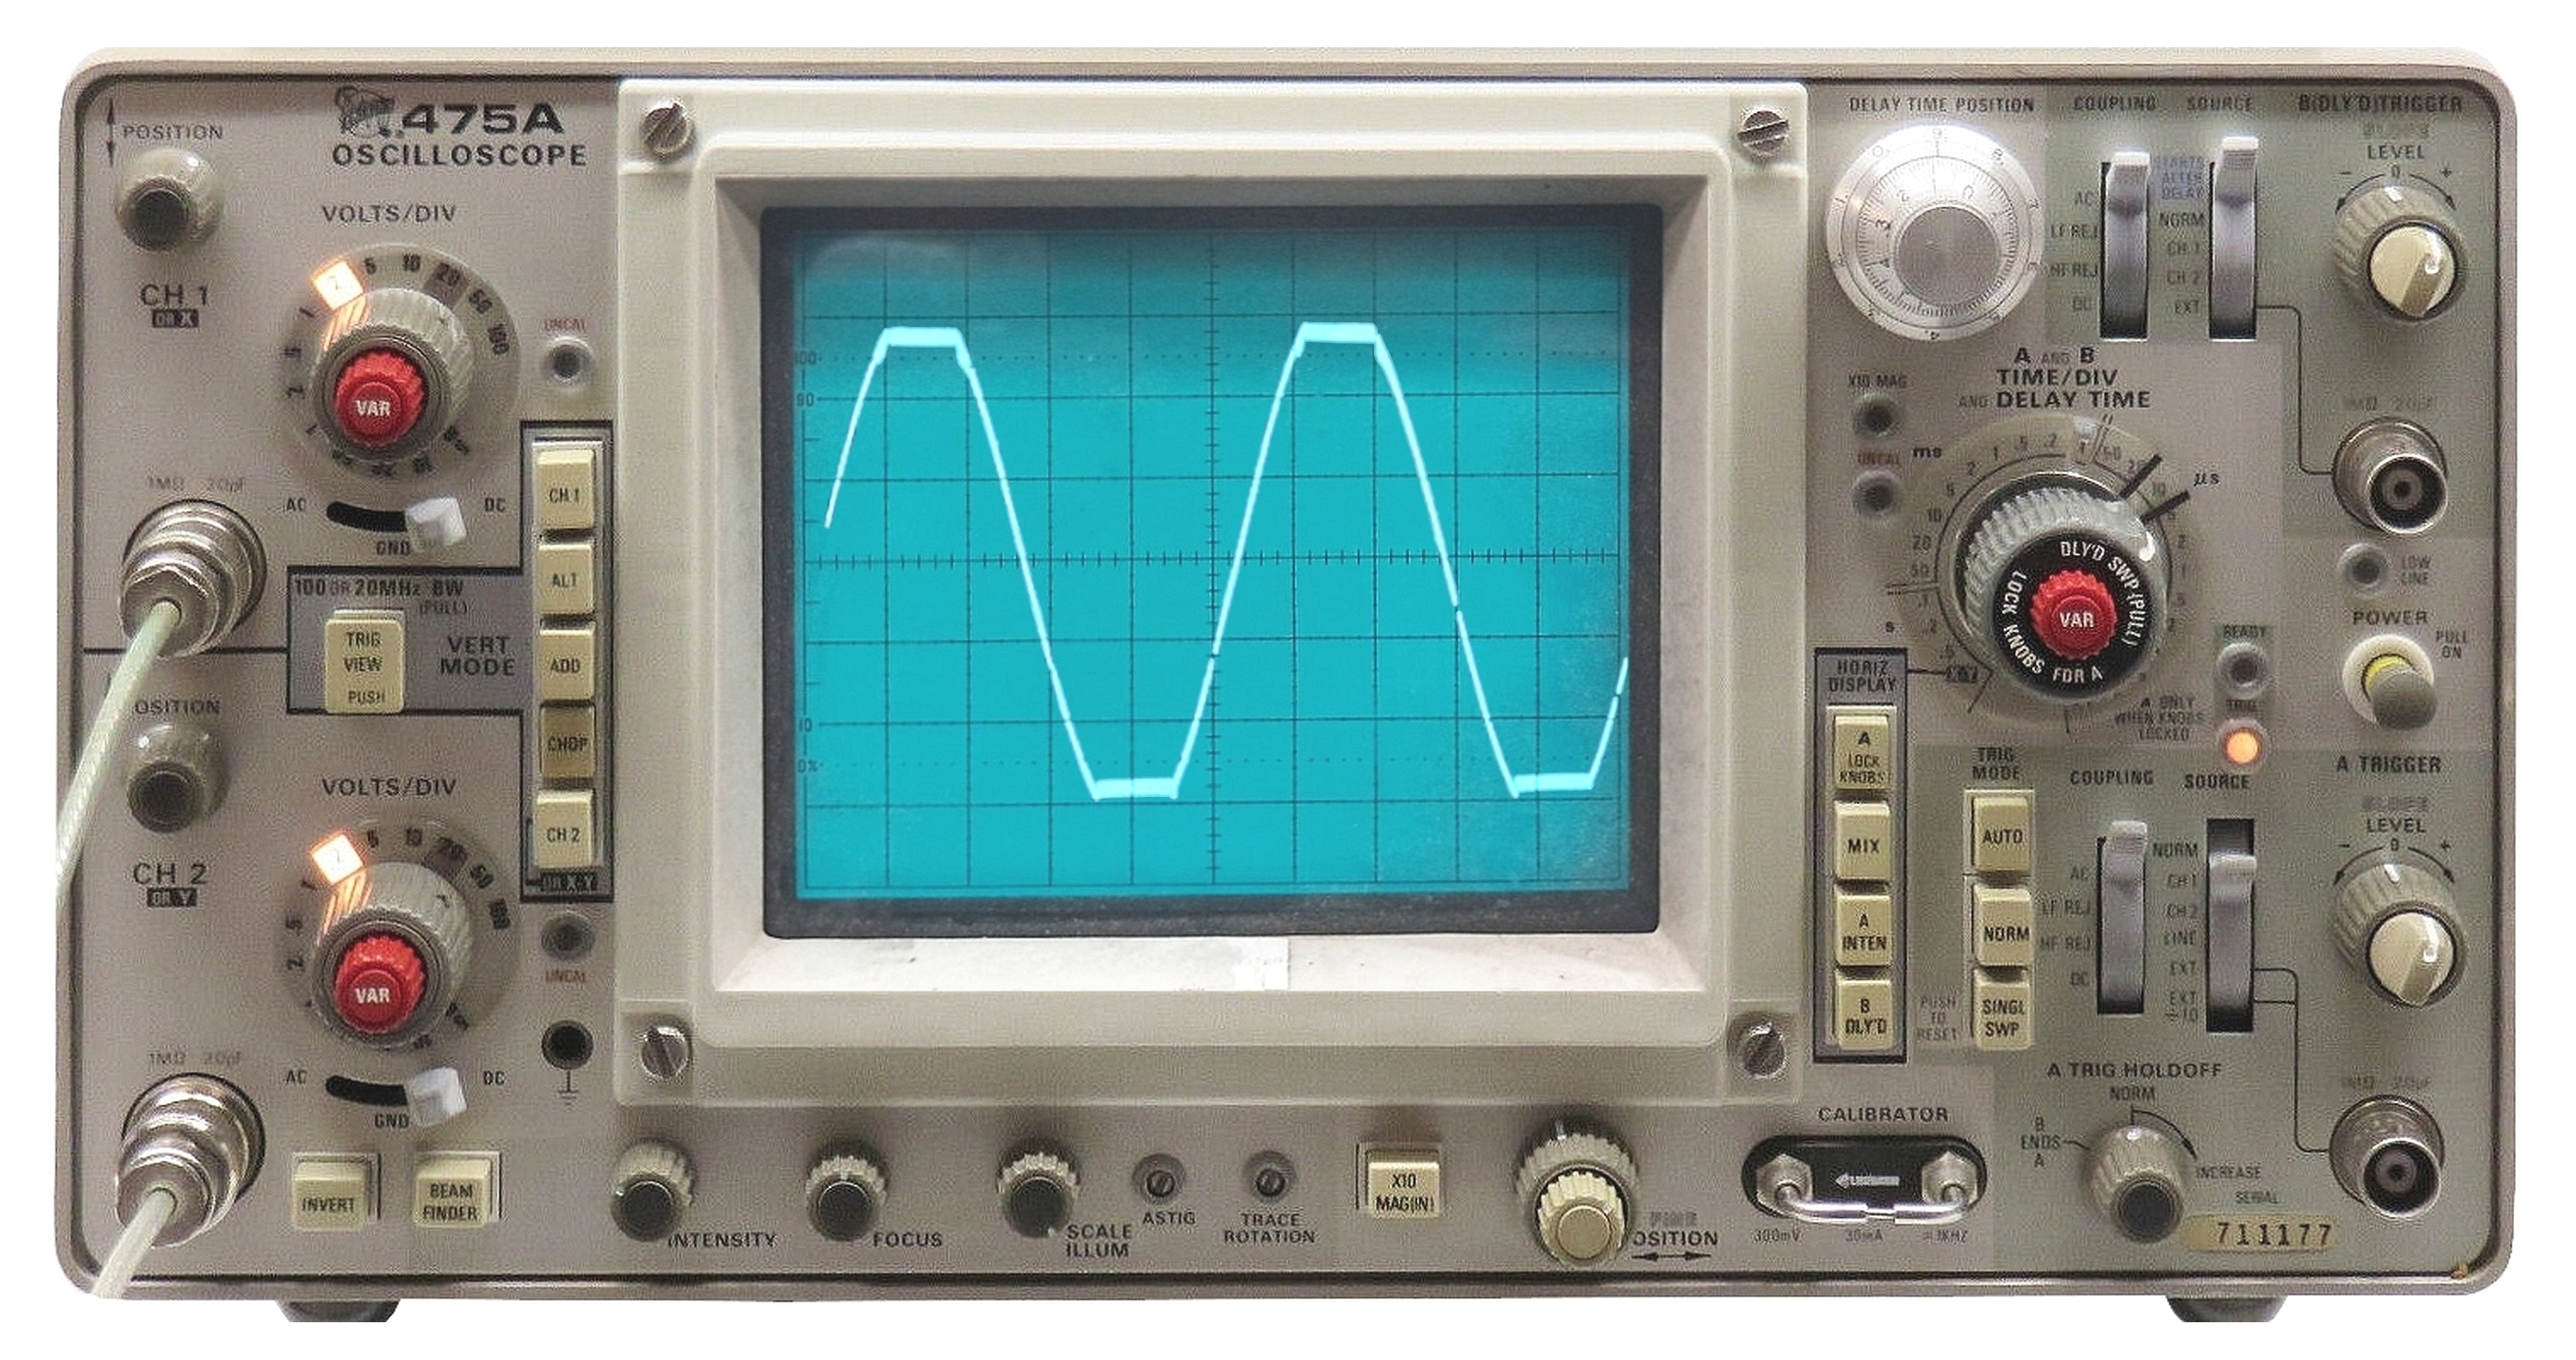 How to use an oscilloscope with an A/C source 